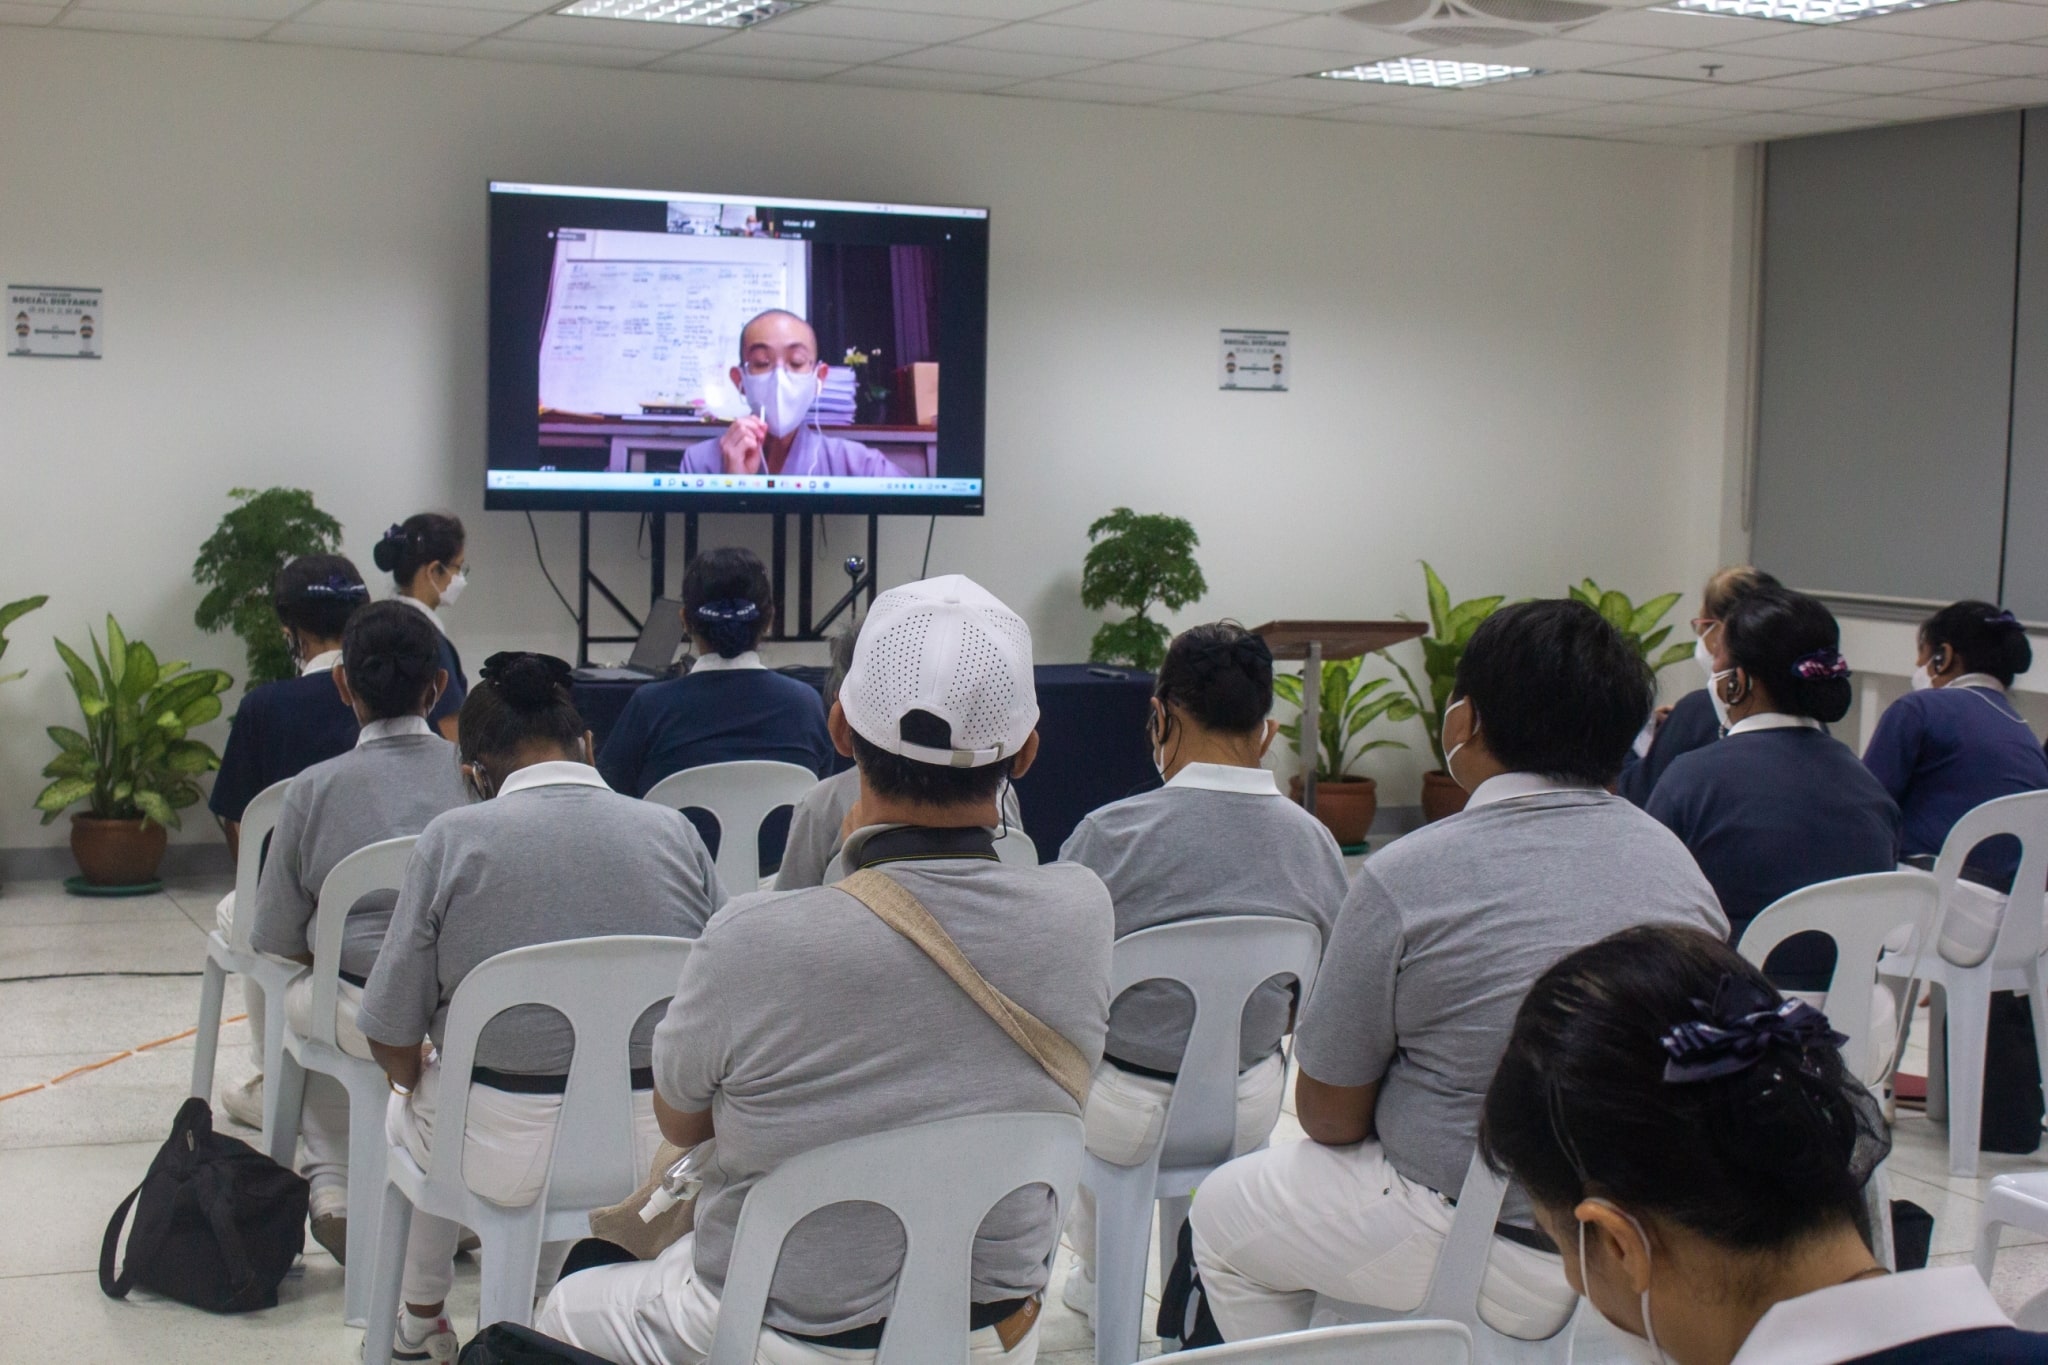 Master De Cheng, a Buddhist nun from the Jing Si Abode in Hualien, Taiwan, addresses volunteers in a virtual, real-time Q&A session conducted in English.【Photo by Marella Saldonido】